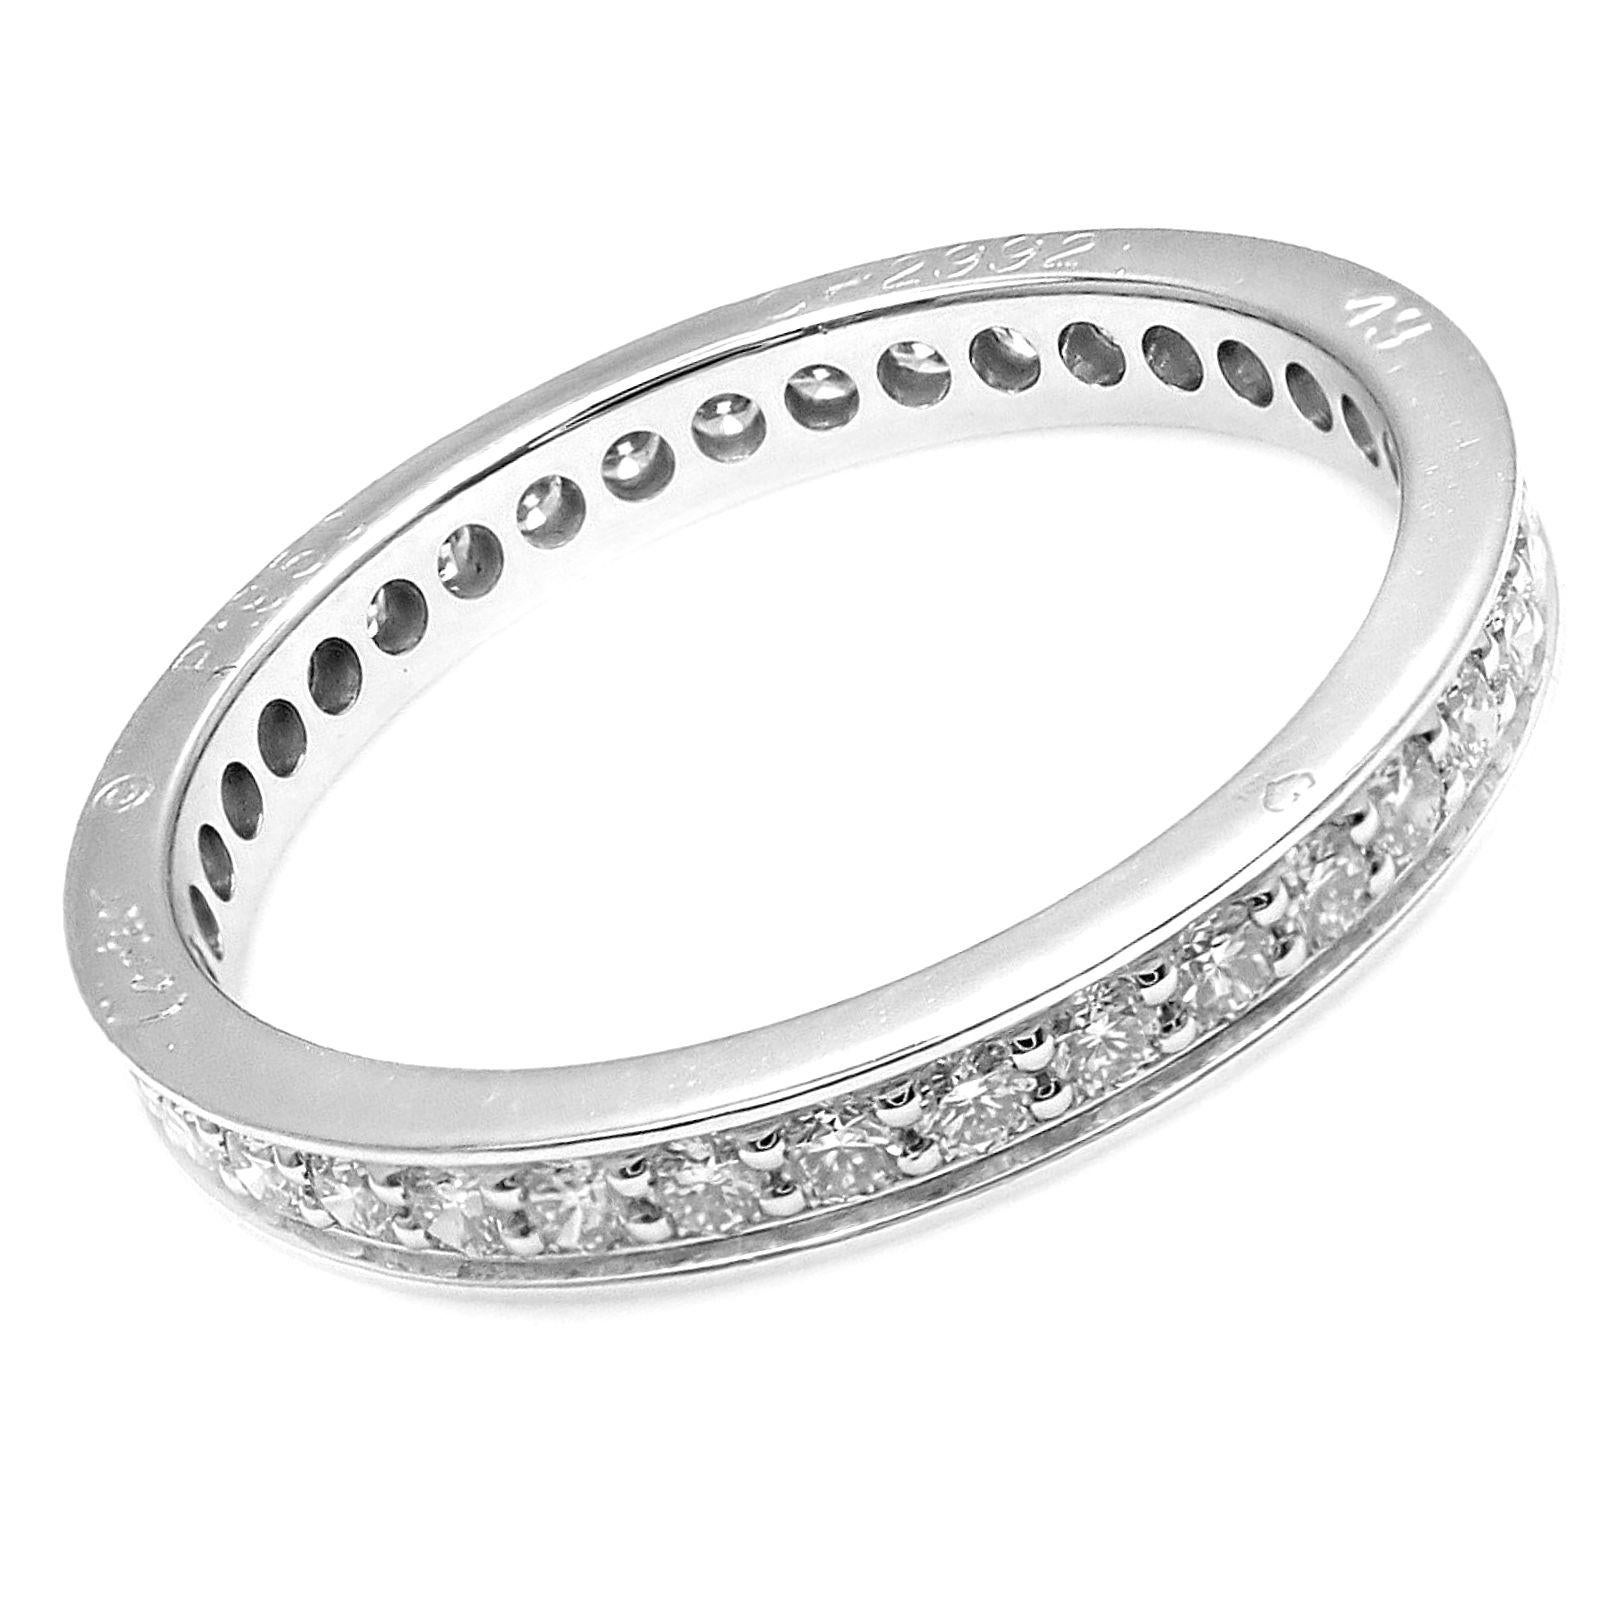 Platinum Diamond Eternity Band Ring by Cartier.
With 45 round brilliant cut diamonds VVS1 clarity, E color total weight approximately 0.70ct 
Details:
Ring Size: European 49, US 5
Weight: 2.4 grams
Width:  2mm
Stamped Hallmarks:  PT950 Cartier 49